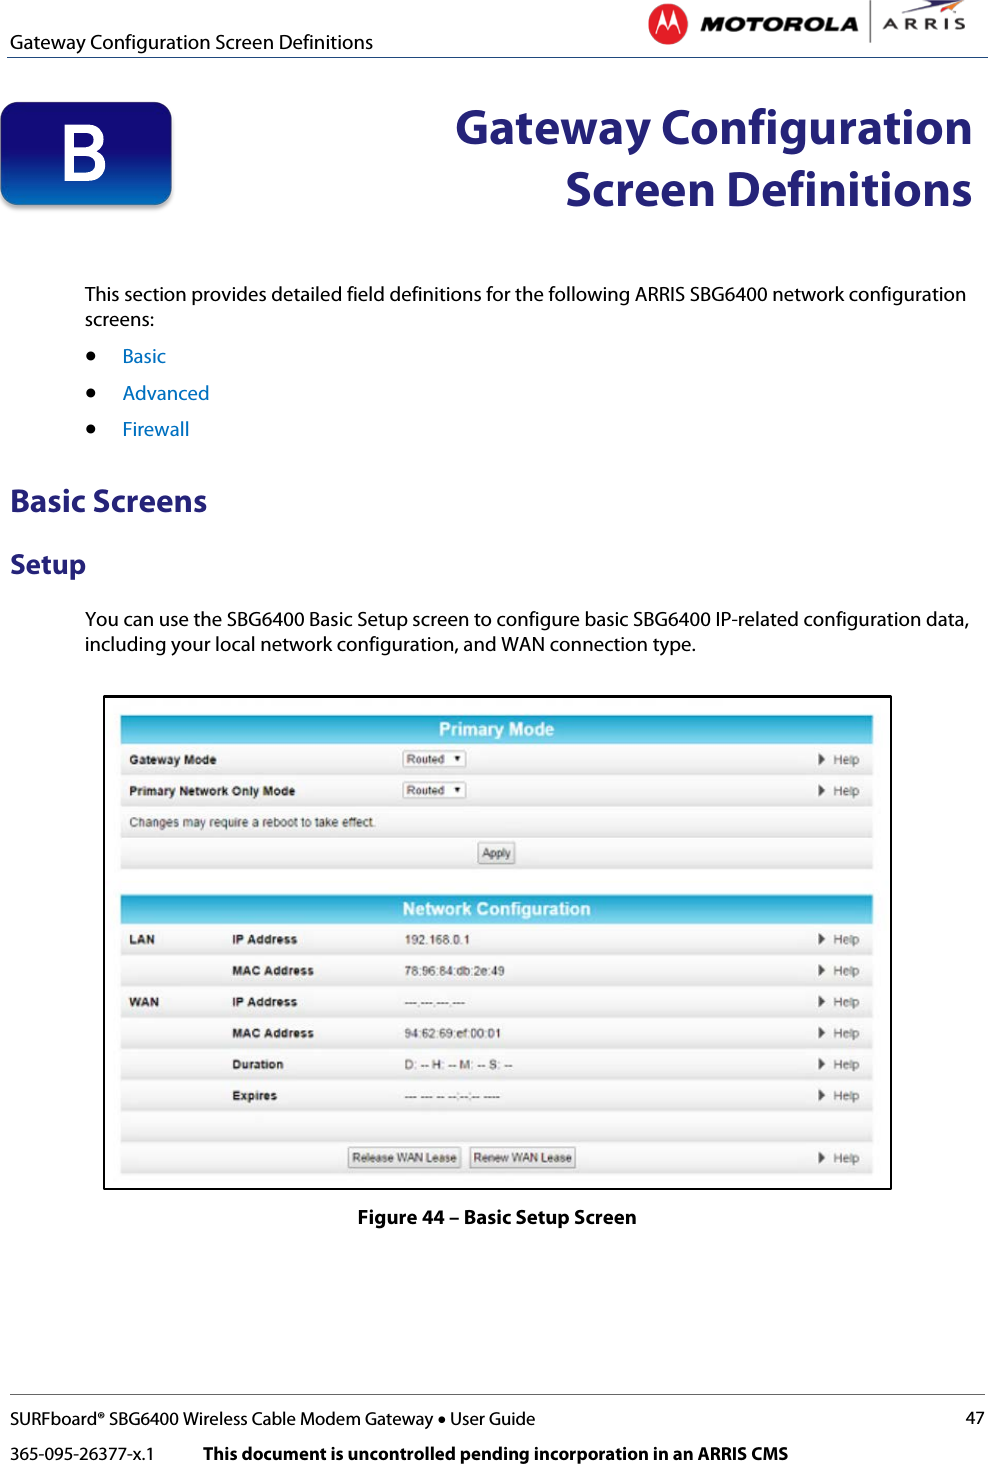 Gateway Configuration Screen Definitions   SURFboard® SBG6400 Wireless Cable Modem Gateway • User Guide 47 365-095-26377-x.1            This document is uncontrolled pending incorporation in an ARRIS CMS   Gateway Configuration Screen Definitions   This section provides detailed field definitions for the following ARRIS SBG6400 network configuration screens: • Basic • Advanced • Firewall Basic Screens Setup You can use the SBG6400 Basic Setup screen to configure basic SBG6400 IP-related configuration data, including your local network configuration, and WAN connection type.  Figure 44 – Basic Setup Screen B 